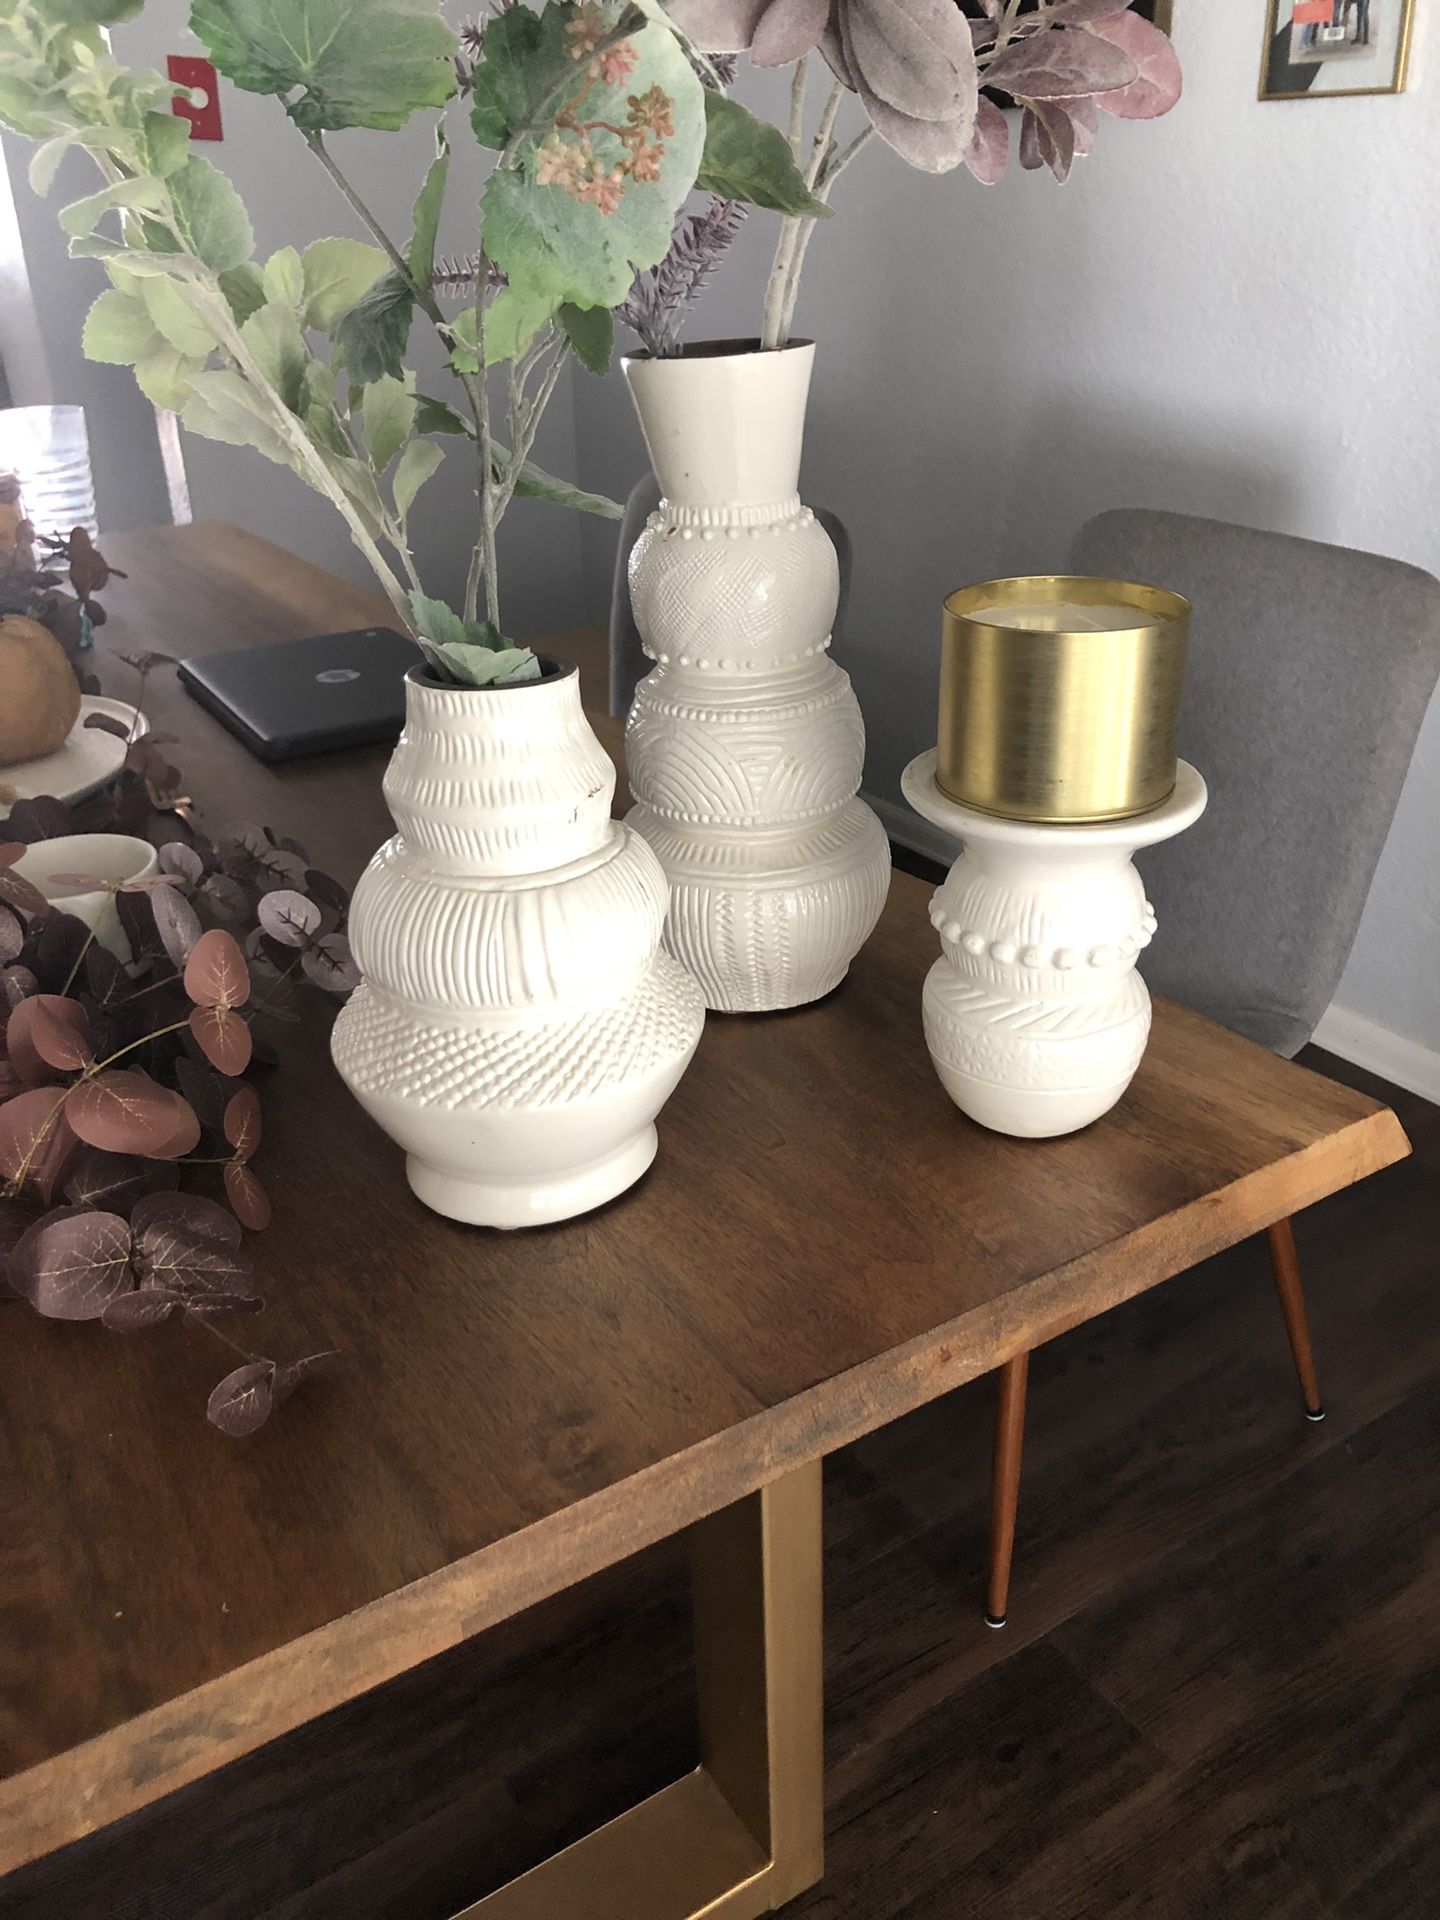 Vase and candle holder